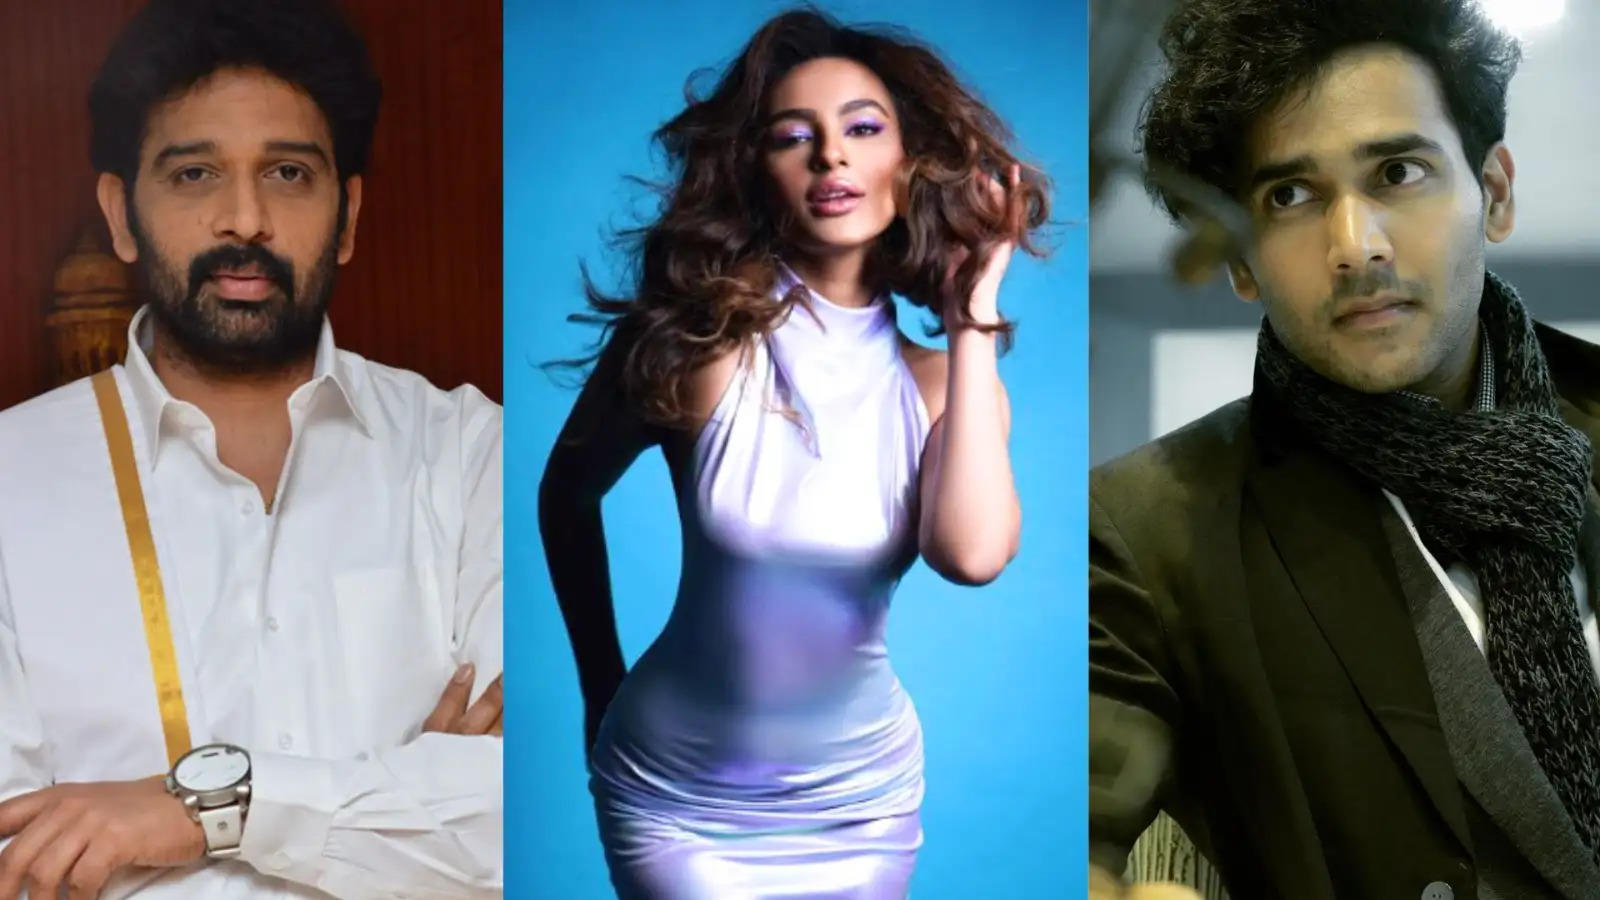 Seerat Kapoor Roped In For Director Shravan's Next Phycological Thriller As Lead Alongside Naresh Agastya and J. D. Chakravarthy- Confirms Source